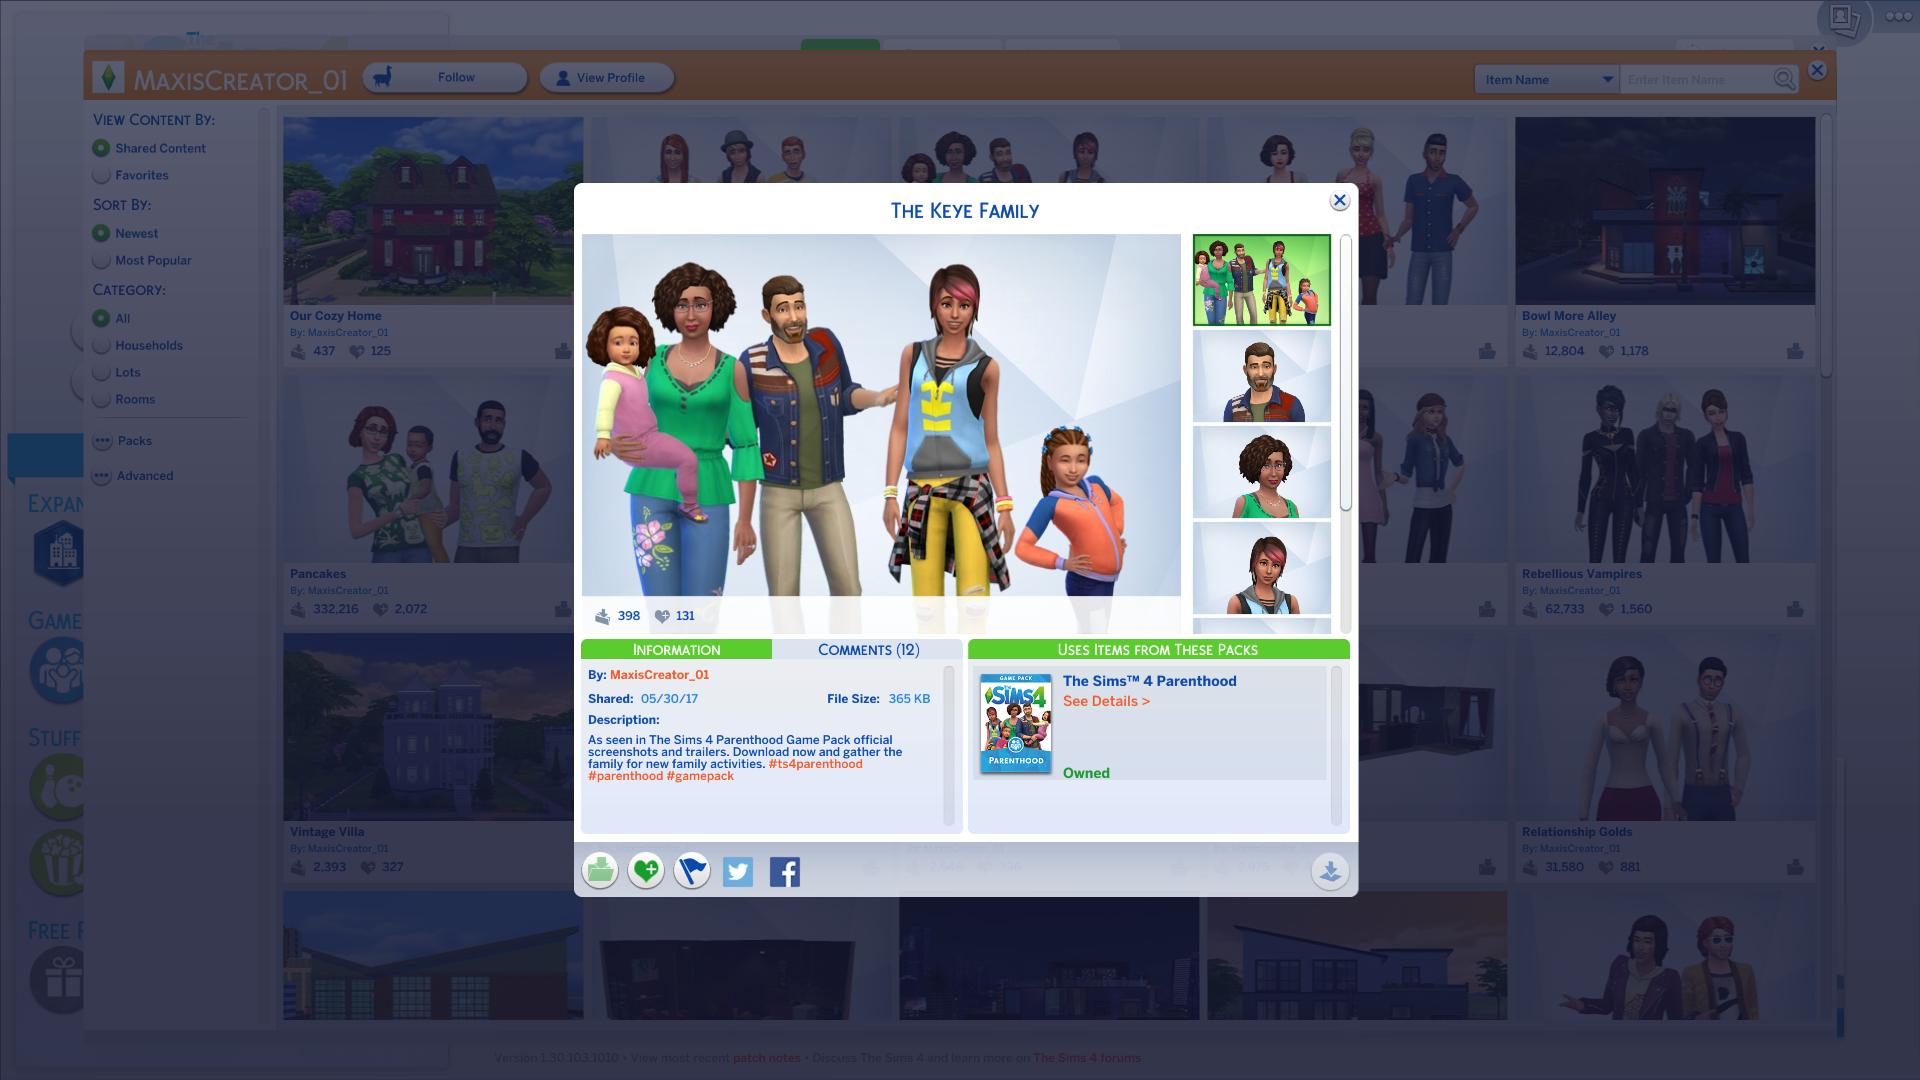 free download the sims 4 seasons